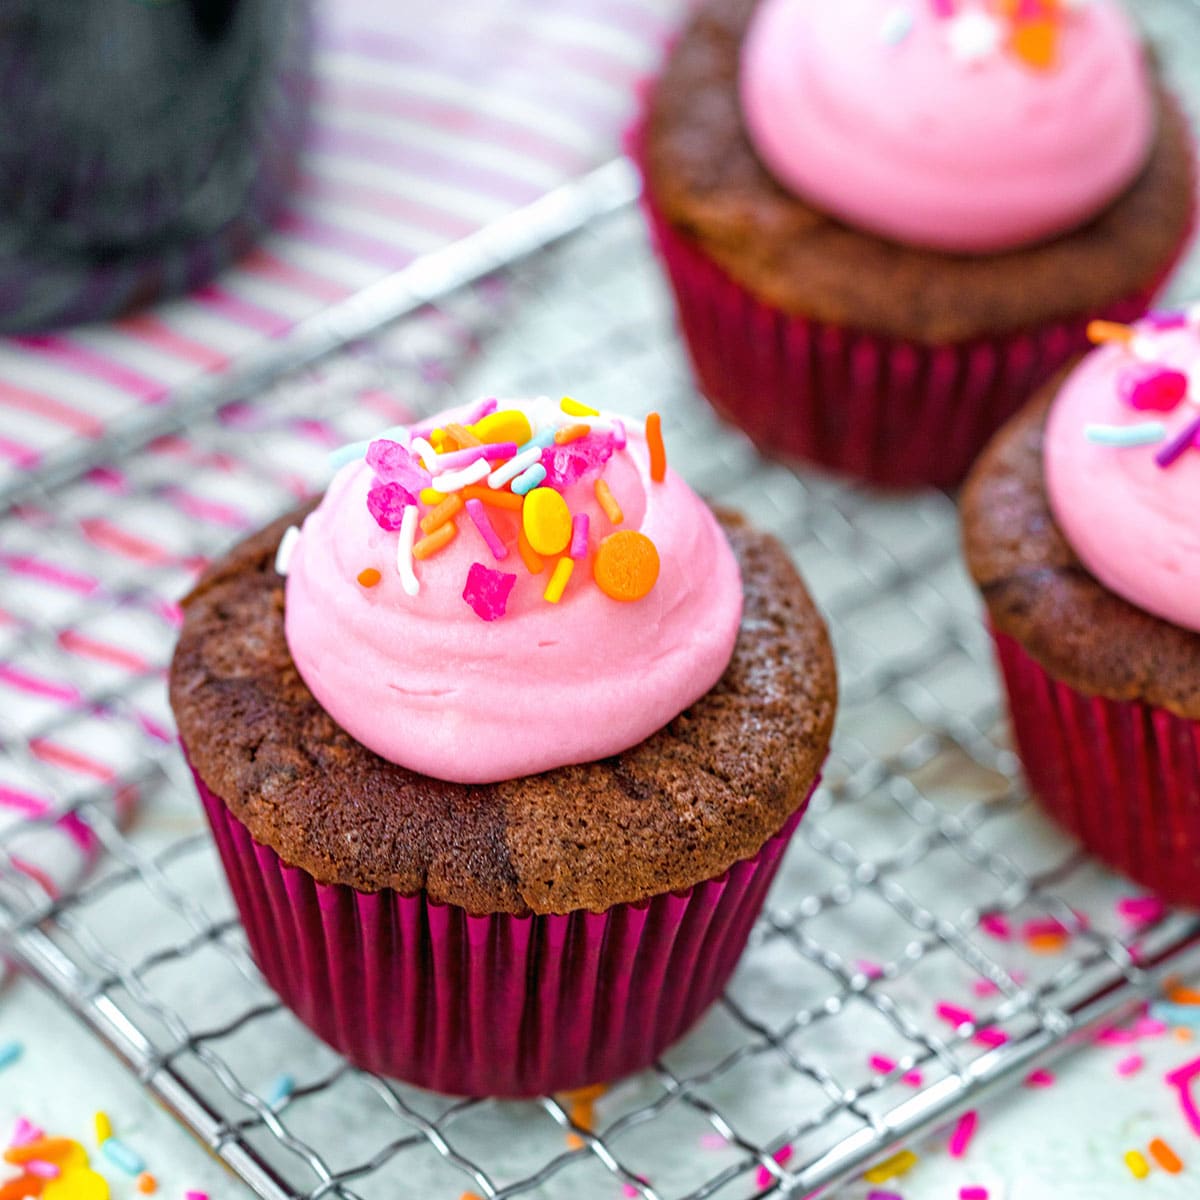 Closeup view of a chocolate red wine cupcake with pink frosting and sprinkles.